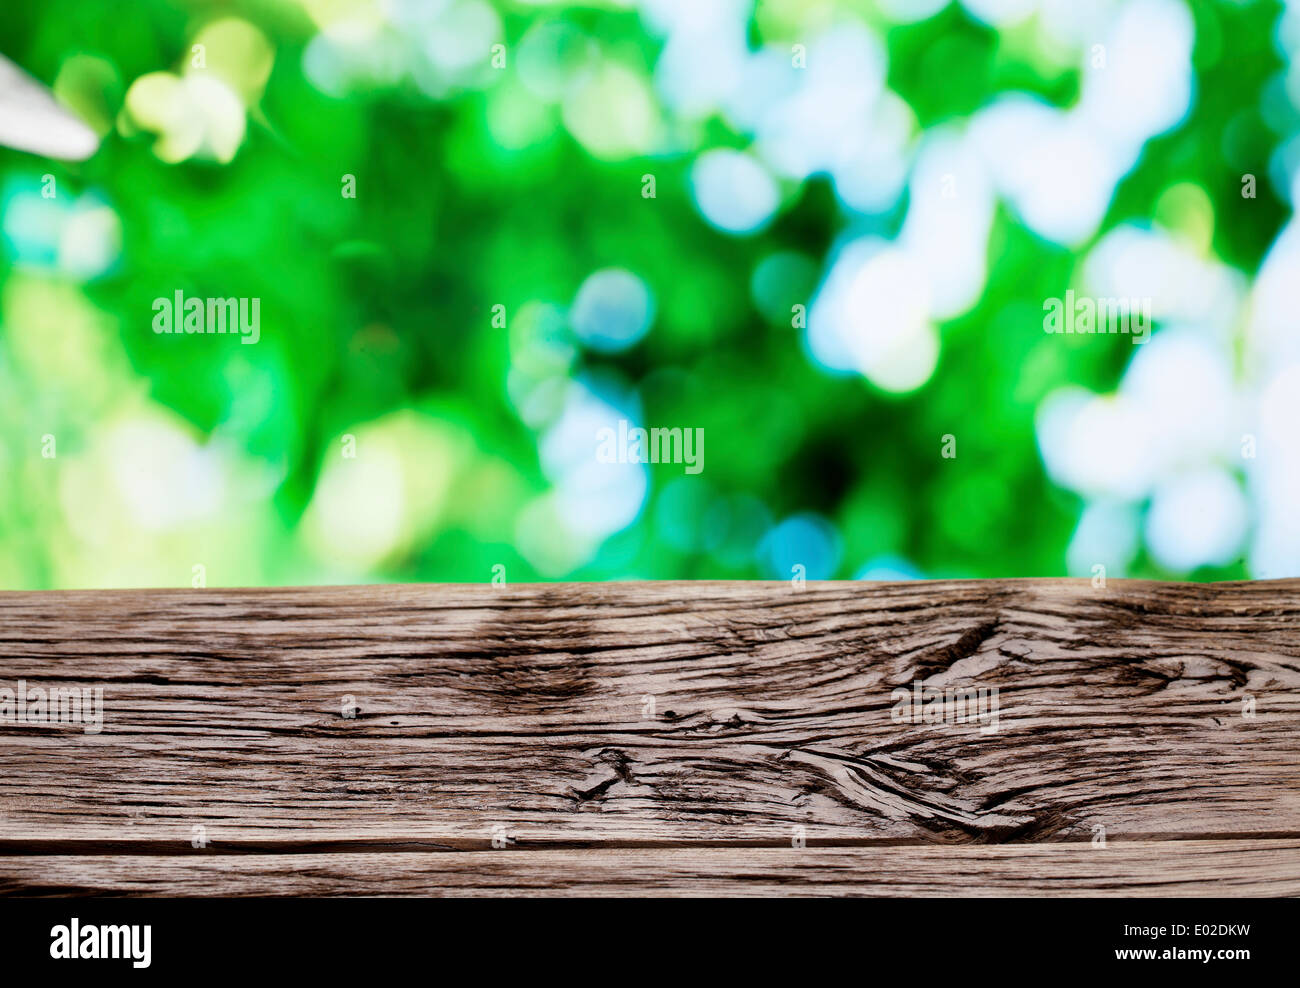 Old wooden table with green foliage background. Stock Photo